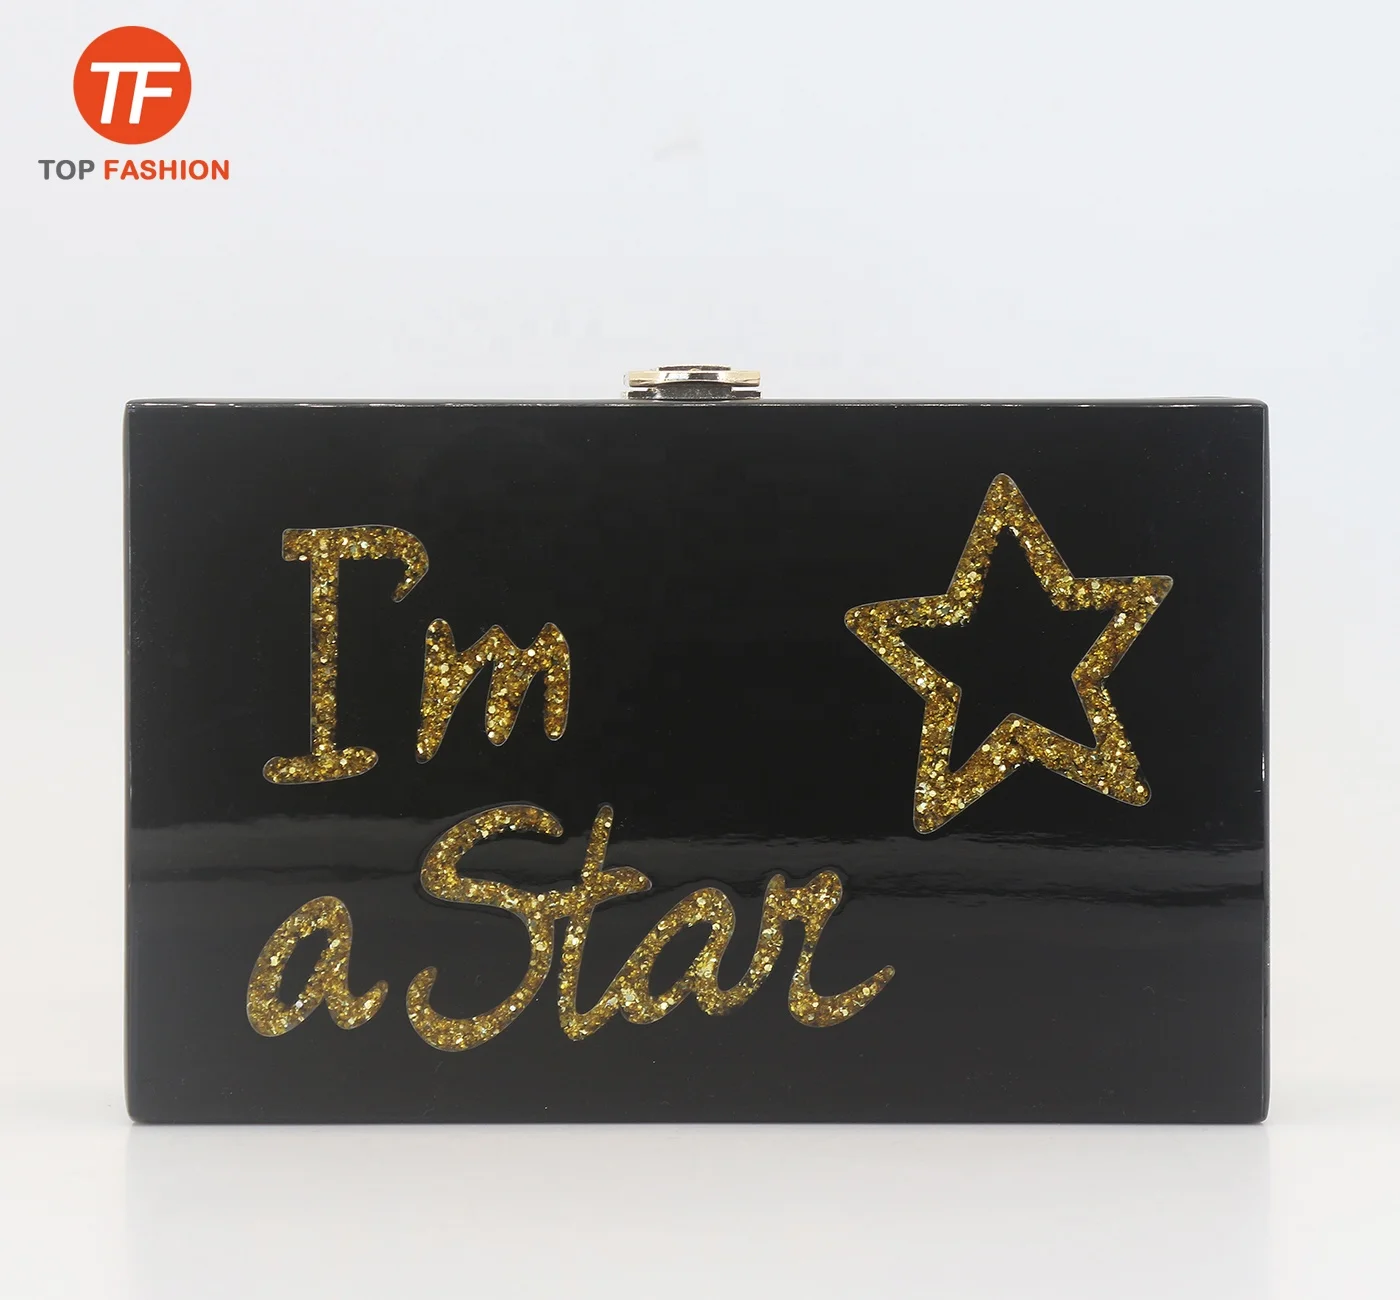 Cute Star Black Acrylic Clutch Purse Evening Bag Wholesales from China Supplier